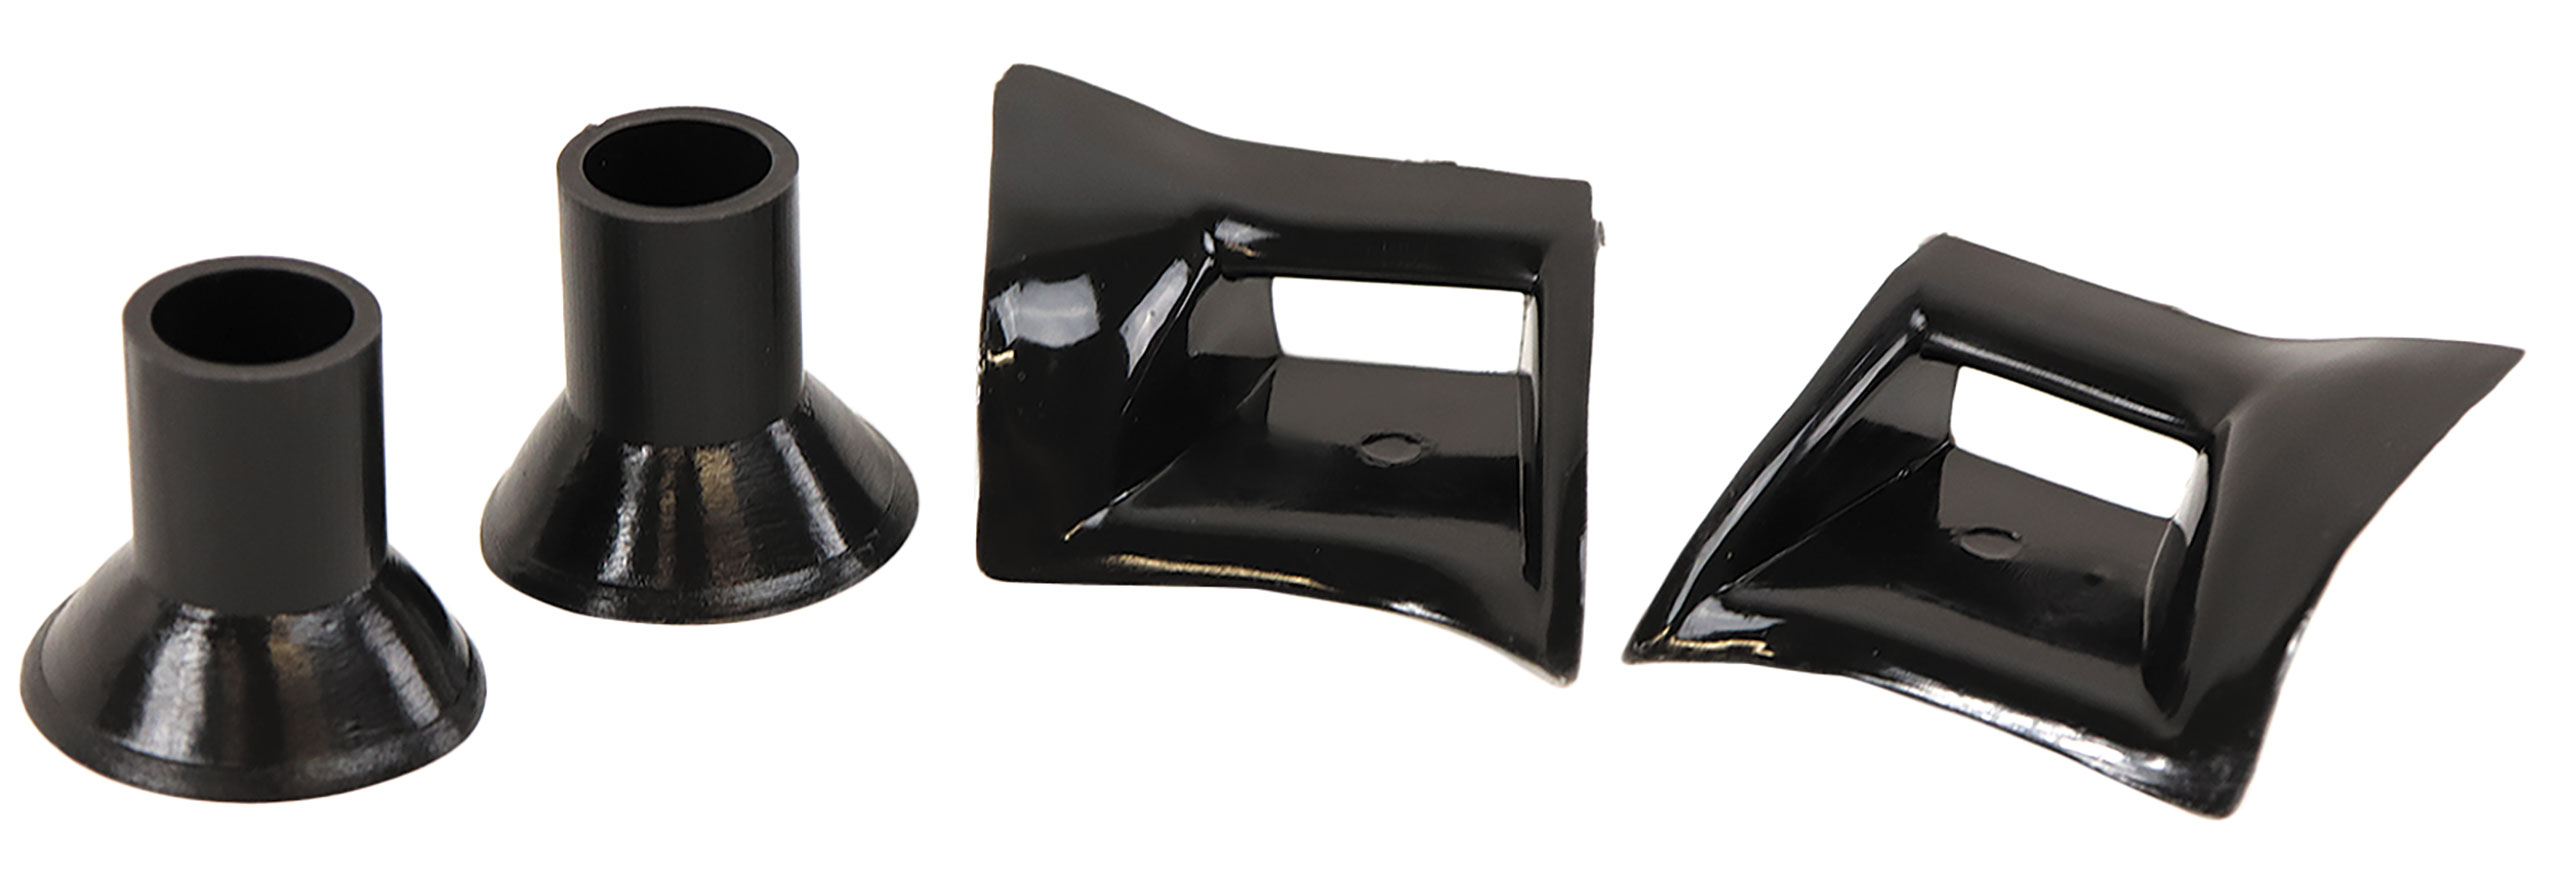 Third Generation 1983-1993 Ford Mustang Convertible Top Latch Catches & Guides - Daniel Carpenter